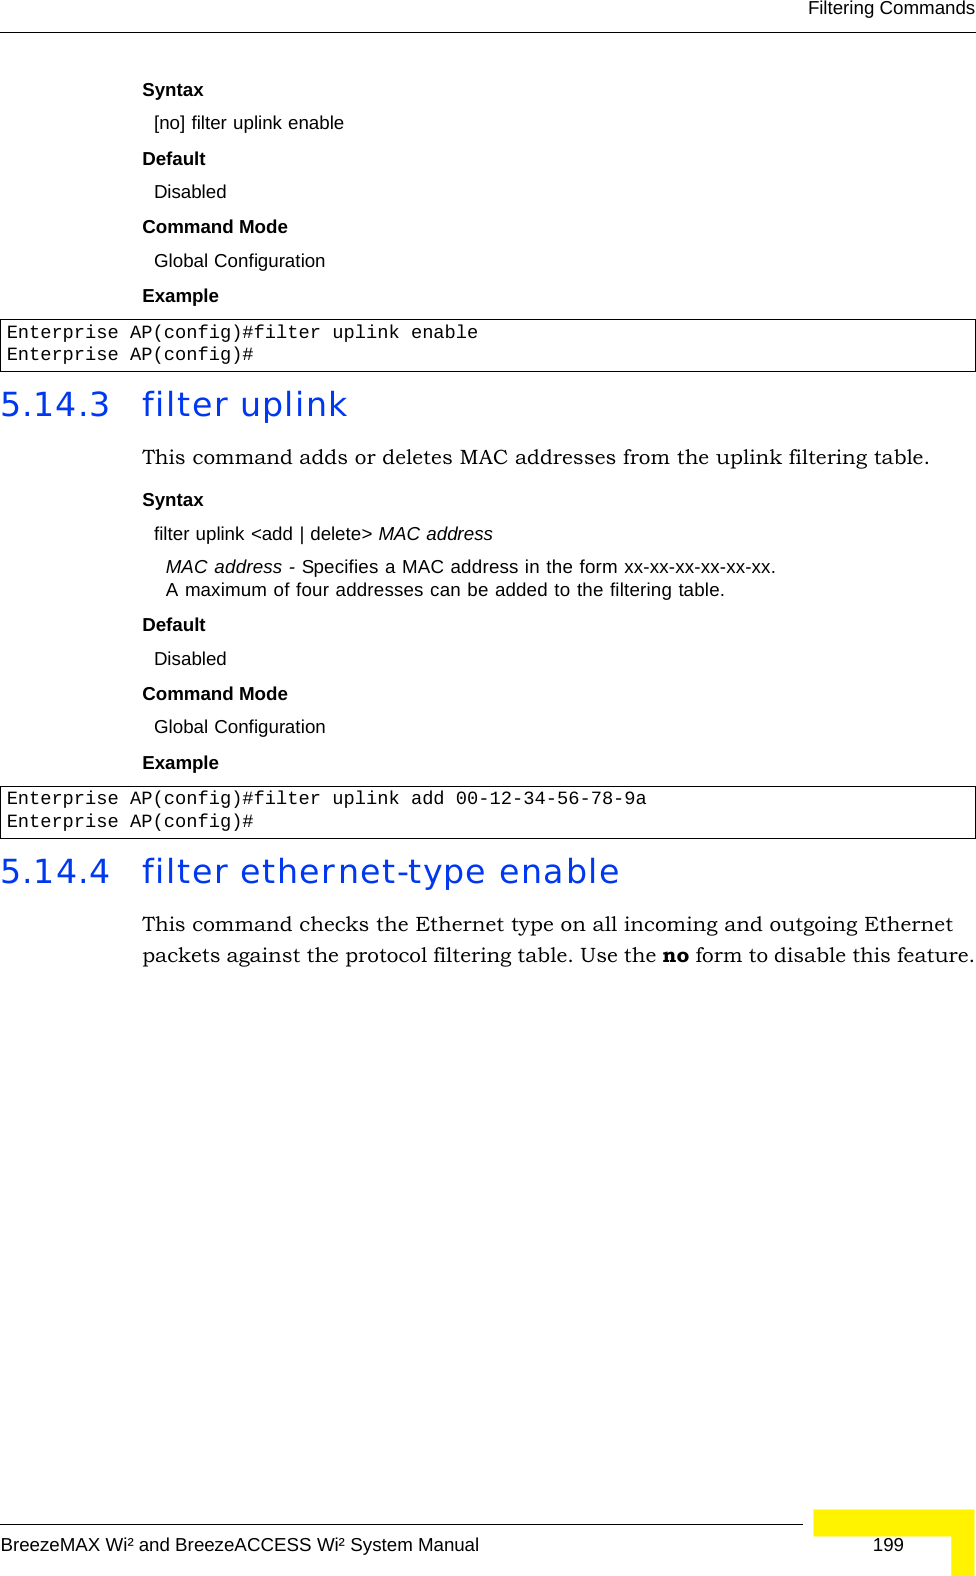 Filtering CommandsBreezeMAX Wi² and BreezeACCESS Wi² System Manual  199Syntax[no] filter uplink enableDefaultDisabledCommand ModeGlobal ConfigurationExample5.14.3 filter uplinkThis command adds or deletes MAC addresses from the uplink filtering table.Syntaxfilter uplink &lt;add | delete&gt; MAC addressMAC address - Specifies a MAC address in the form xx-xx-xx-xx-xx-xx. A maximum of four addresses can be added to the filtering table.DefaultDisabledCommand ModeGlobal ConfigurationExample5.14.4 filter ethernet-type enableThis command checks the Ethernet type on all incoming and outgoing Ethernet packets against the protocol filtering table. Use the no form to disable this feature.Enterprise AP(config)#filter uplink enableEnterprise AP(config)#Enterprise AP(config)#filter uplink add 00-12-34-56-78-9aEnterprise AP(config)#